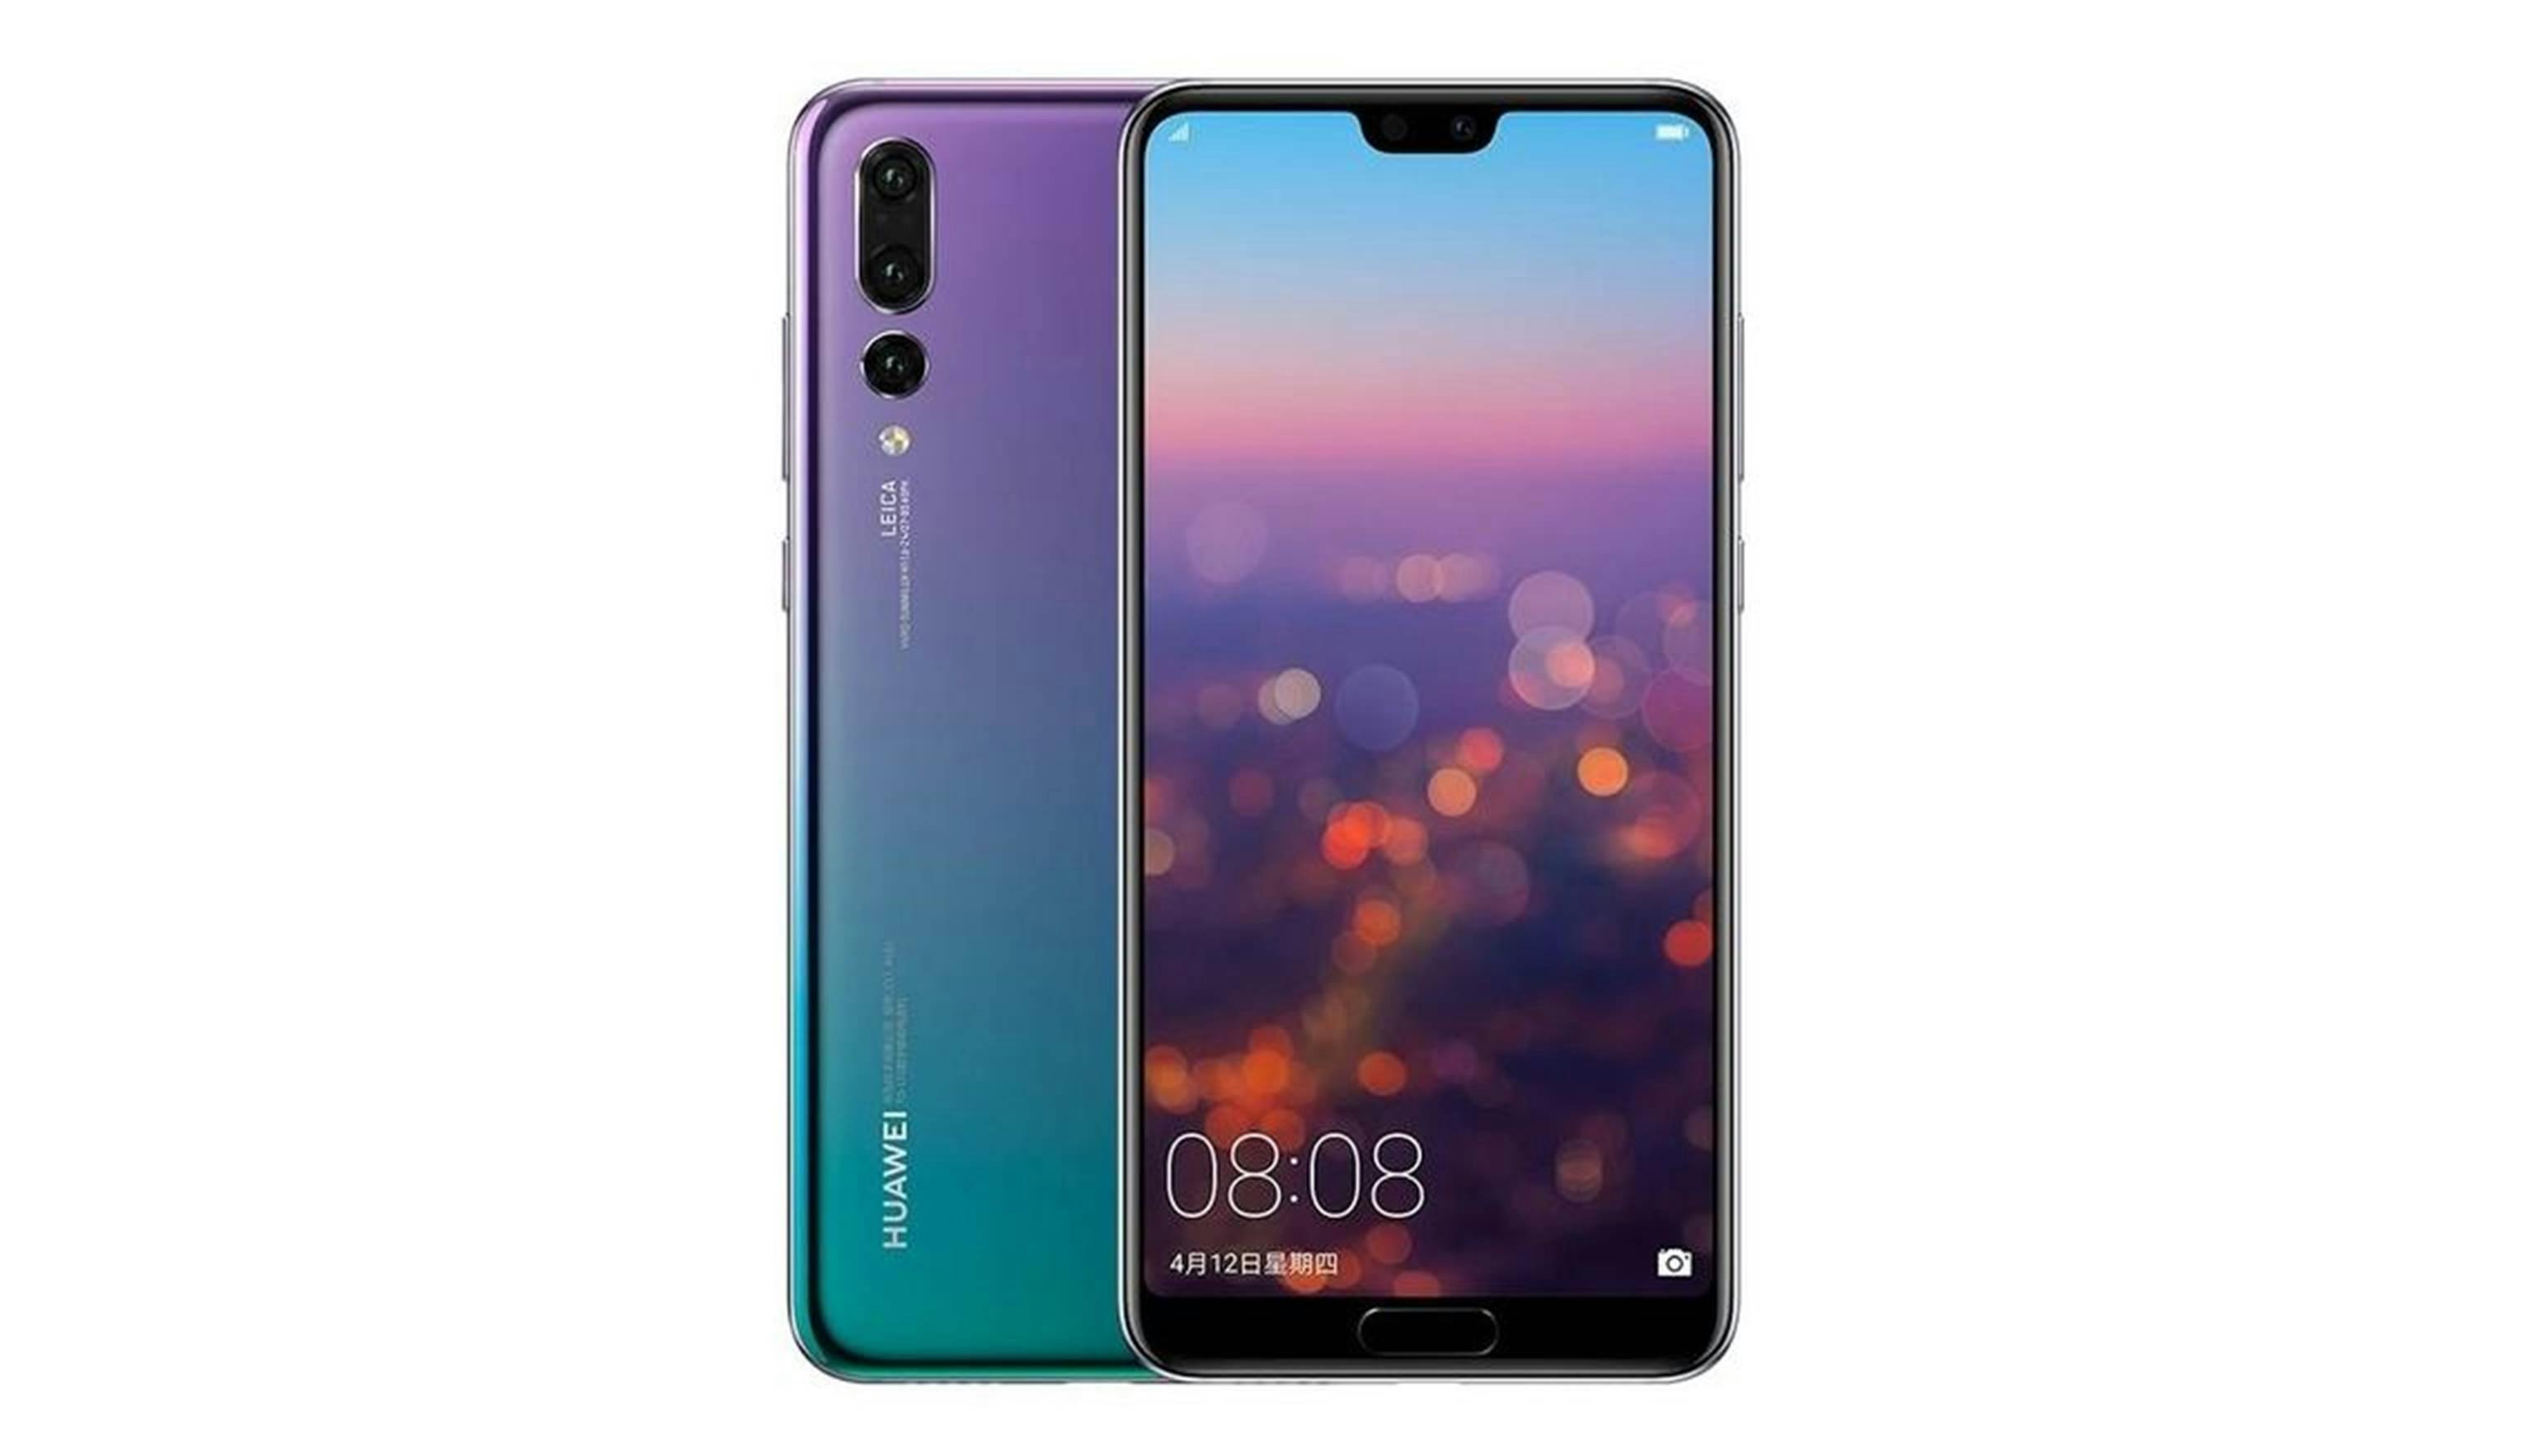 https://hnsgsfp.imgix.net/4/images/detailed/32/Huawei_P20_Pro_128GB_-_Twilight_.jpg?fit=fill&bg=0FFF&w=3072&h=1766&auto=format,compress